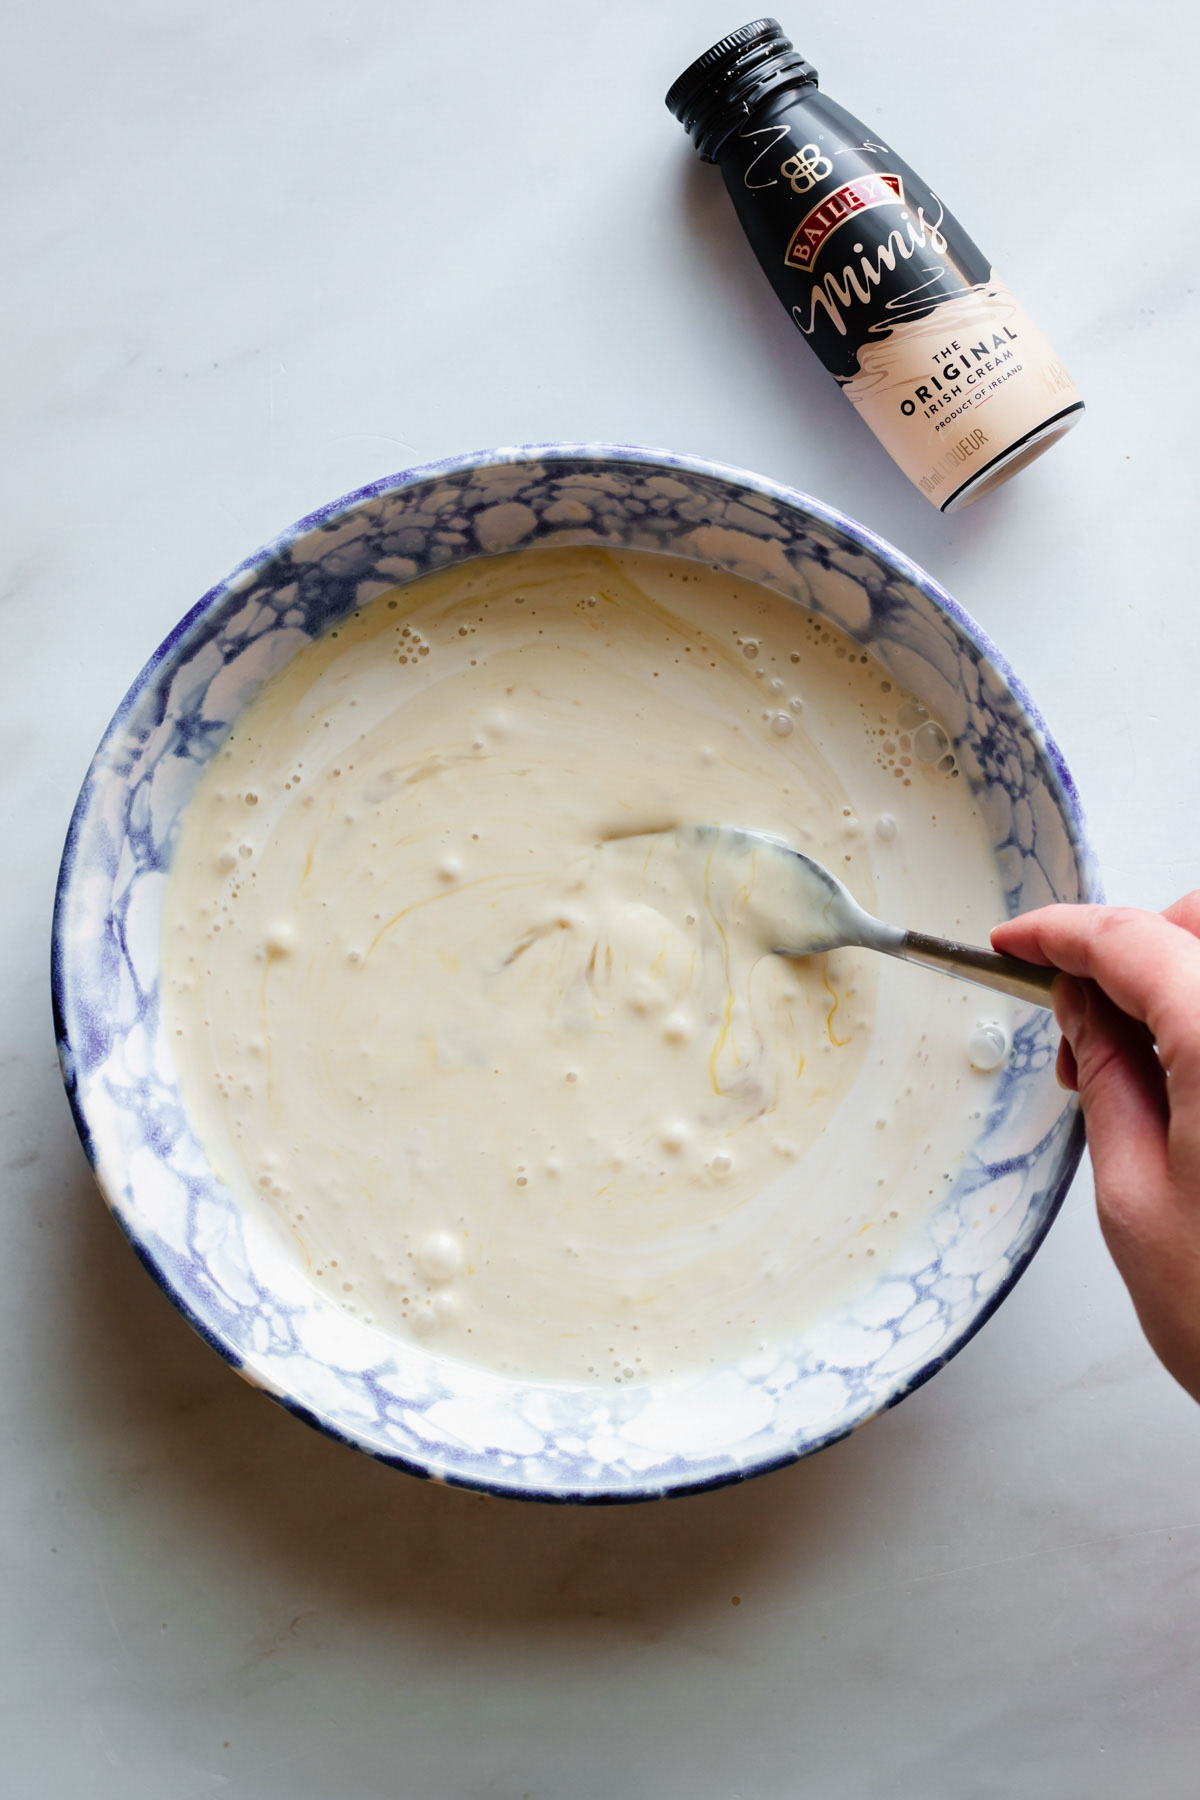 Whisking the custard ingredients in a bowl.